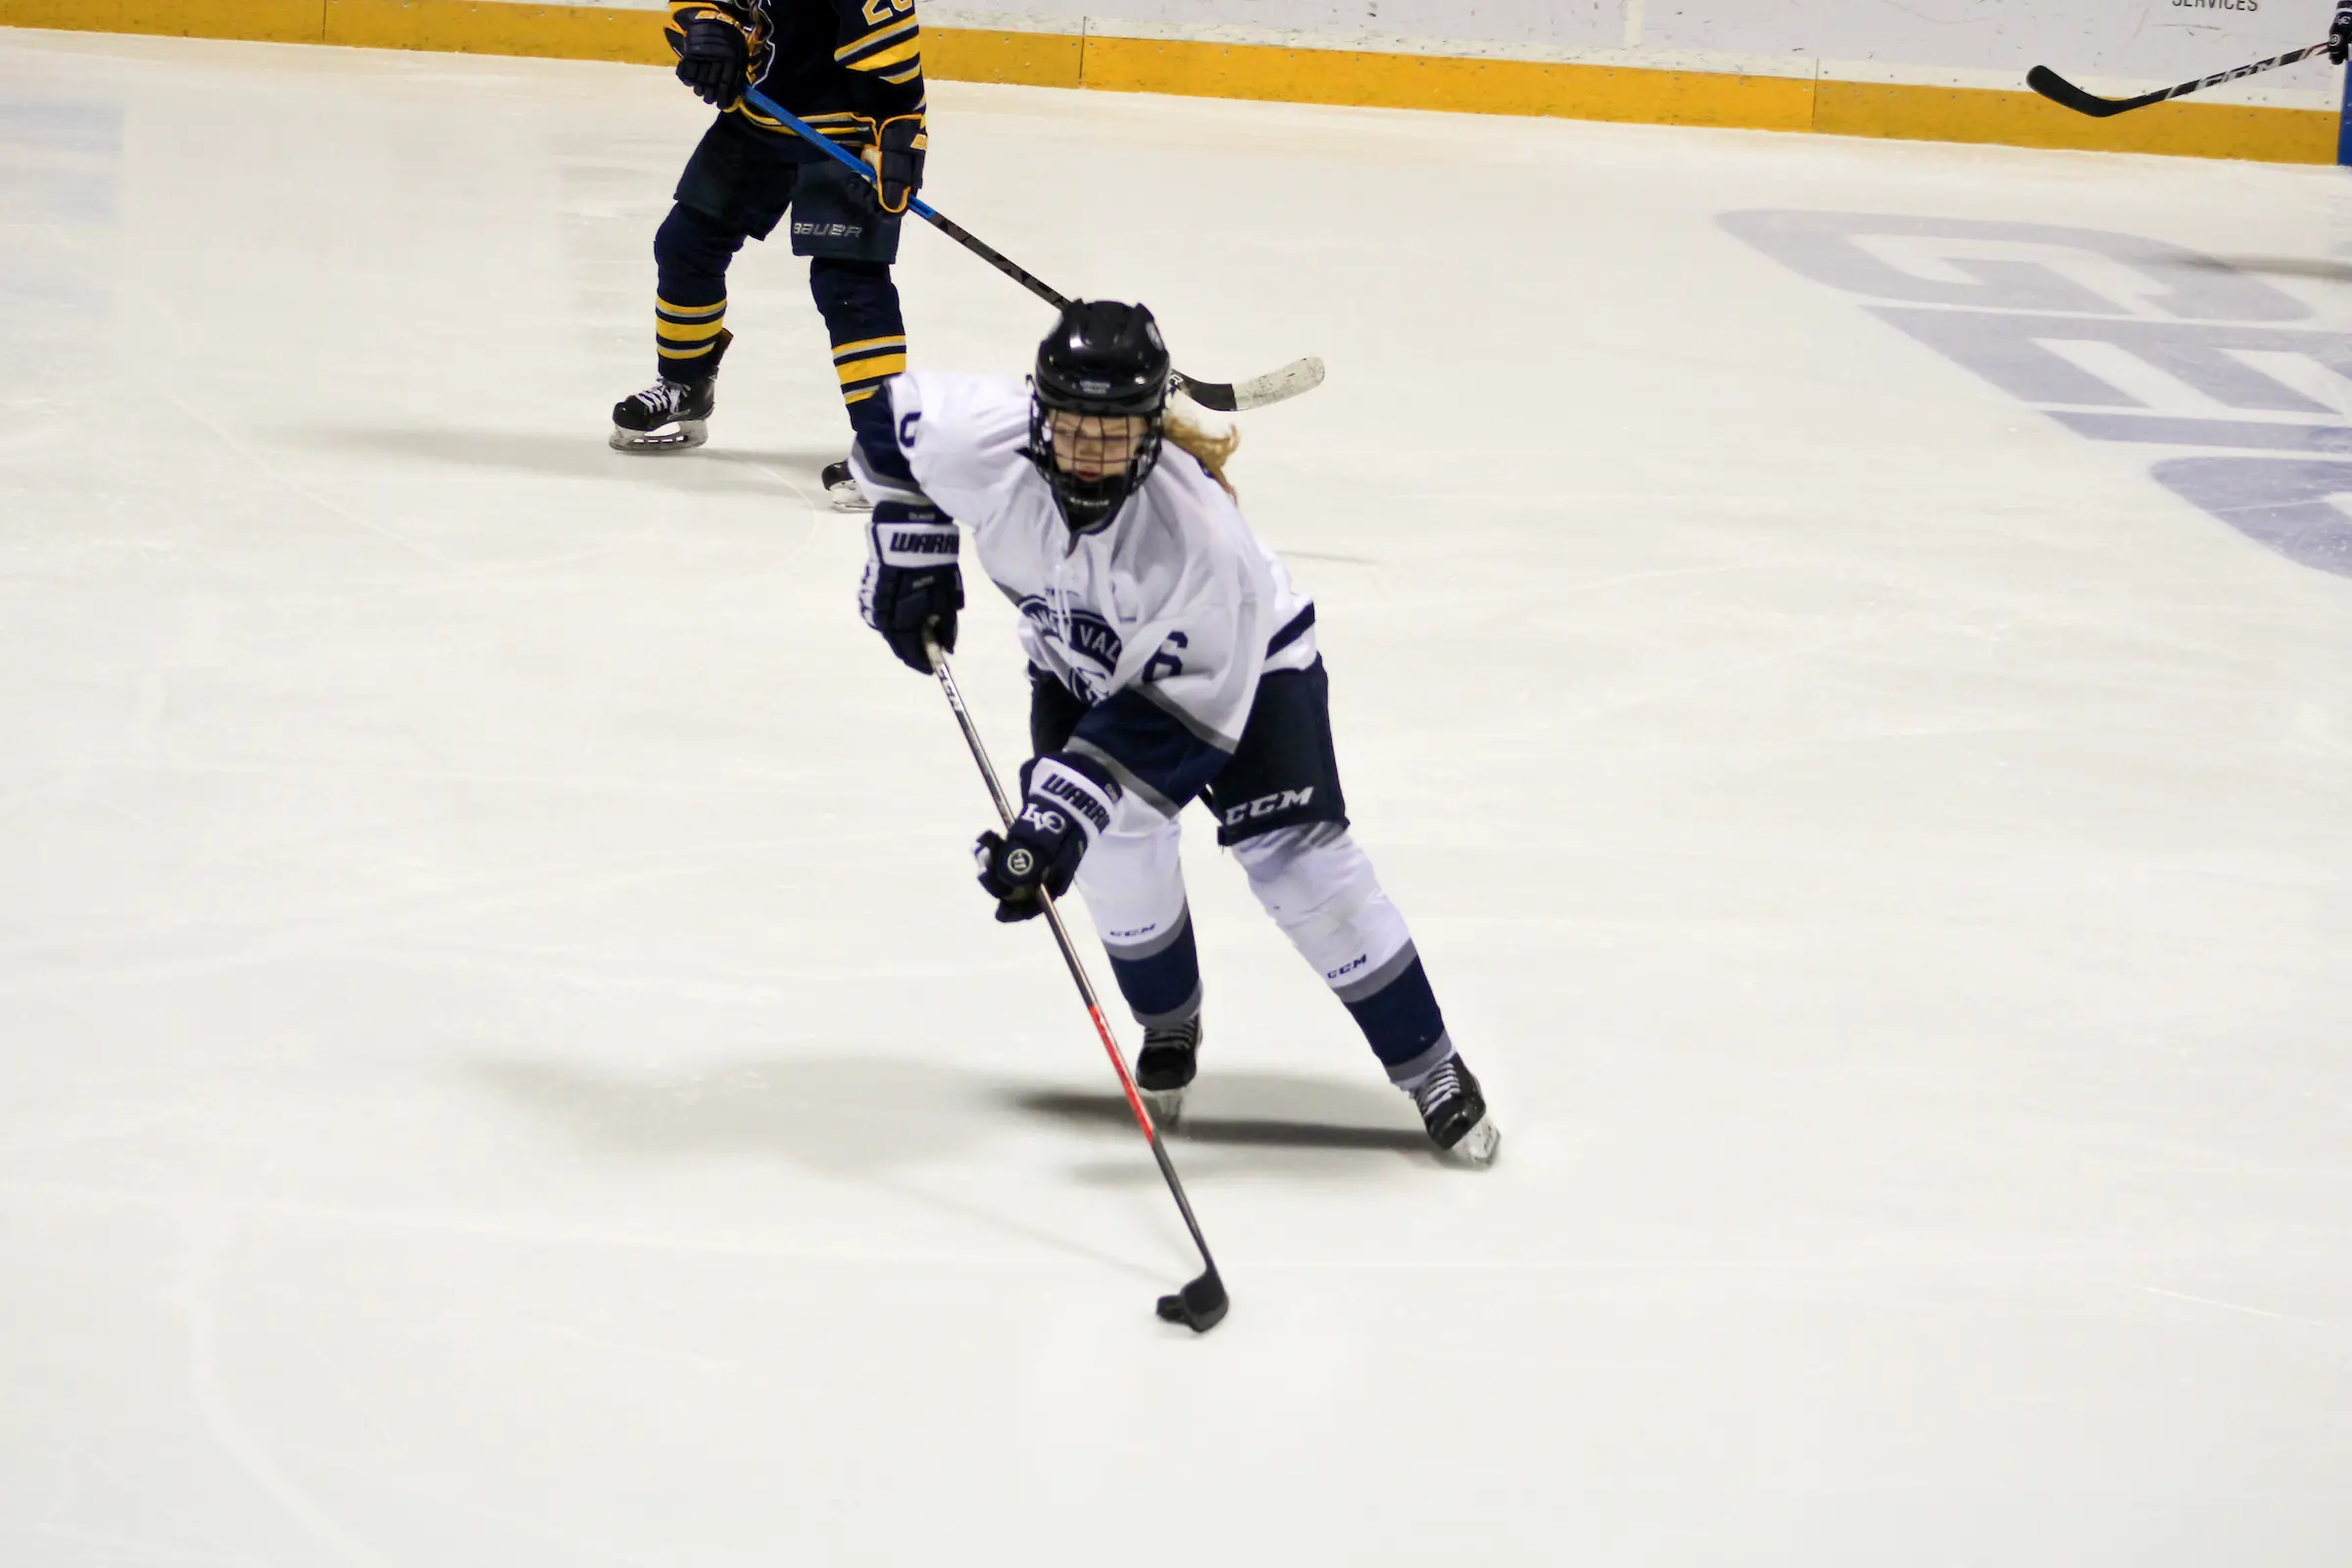 women's ice hockey player skates with puck